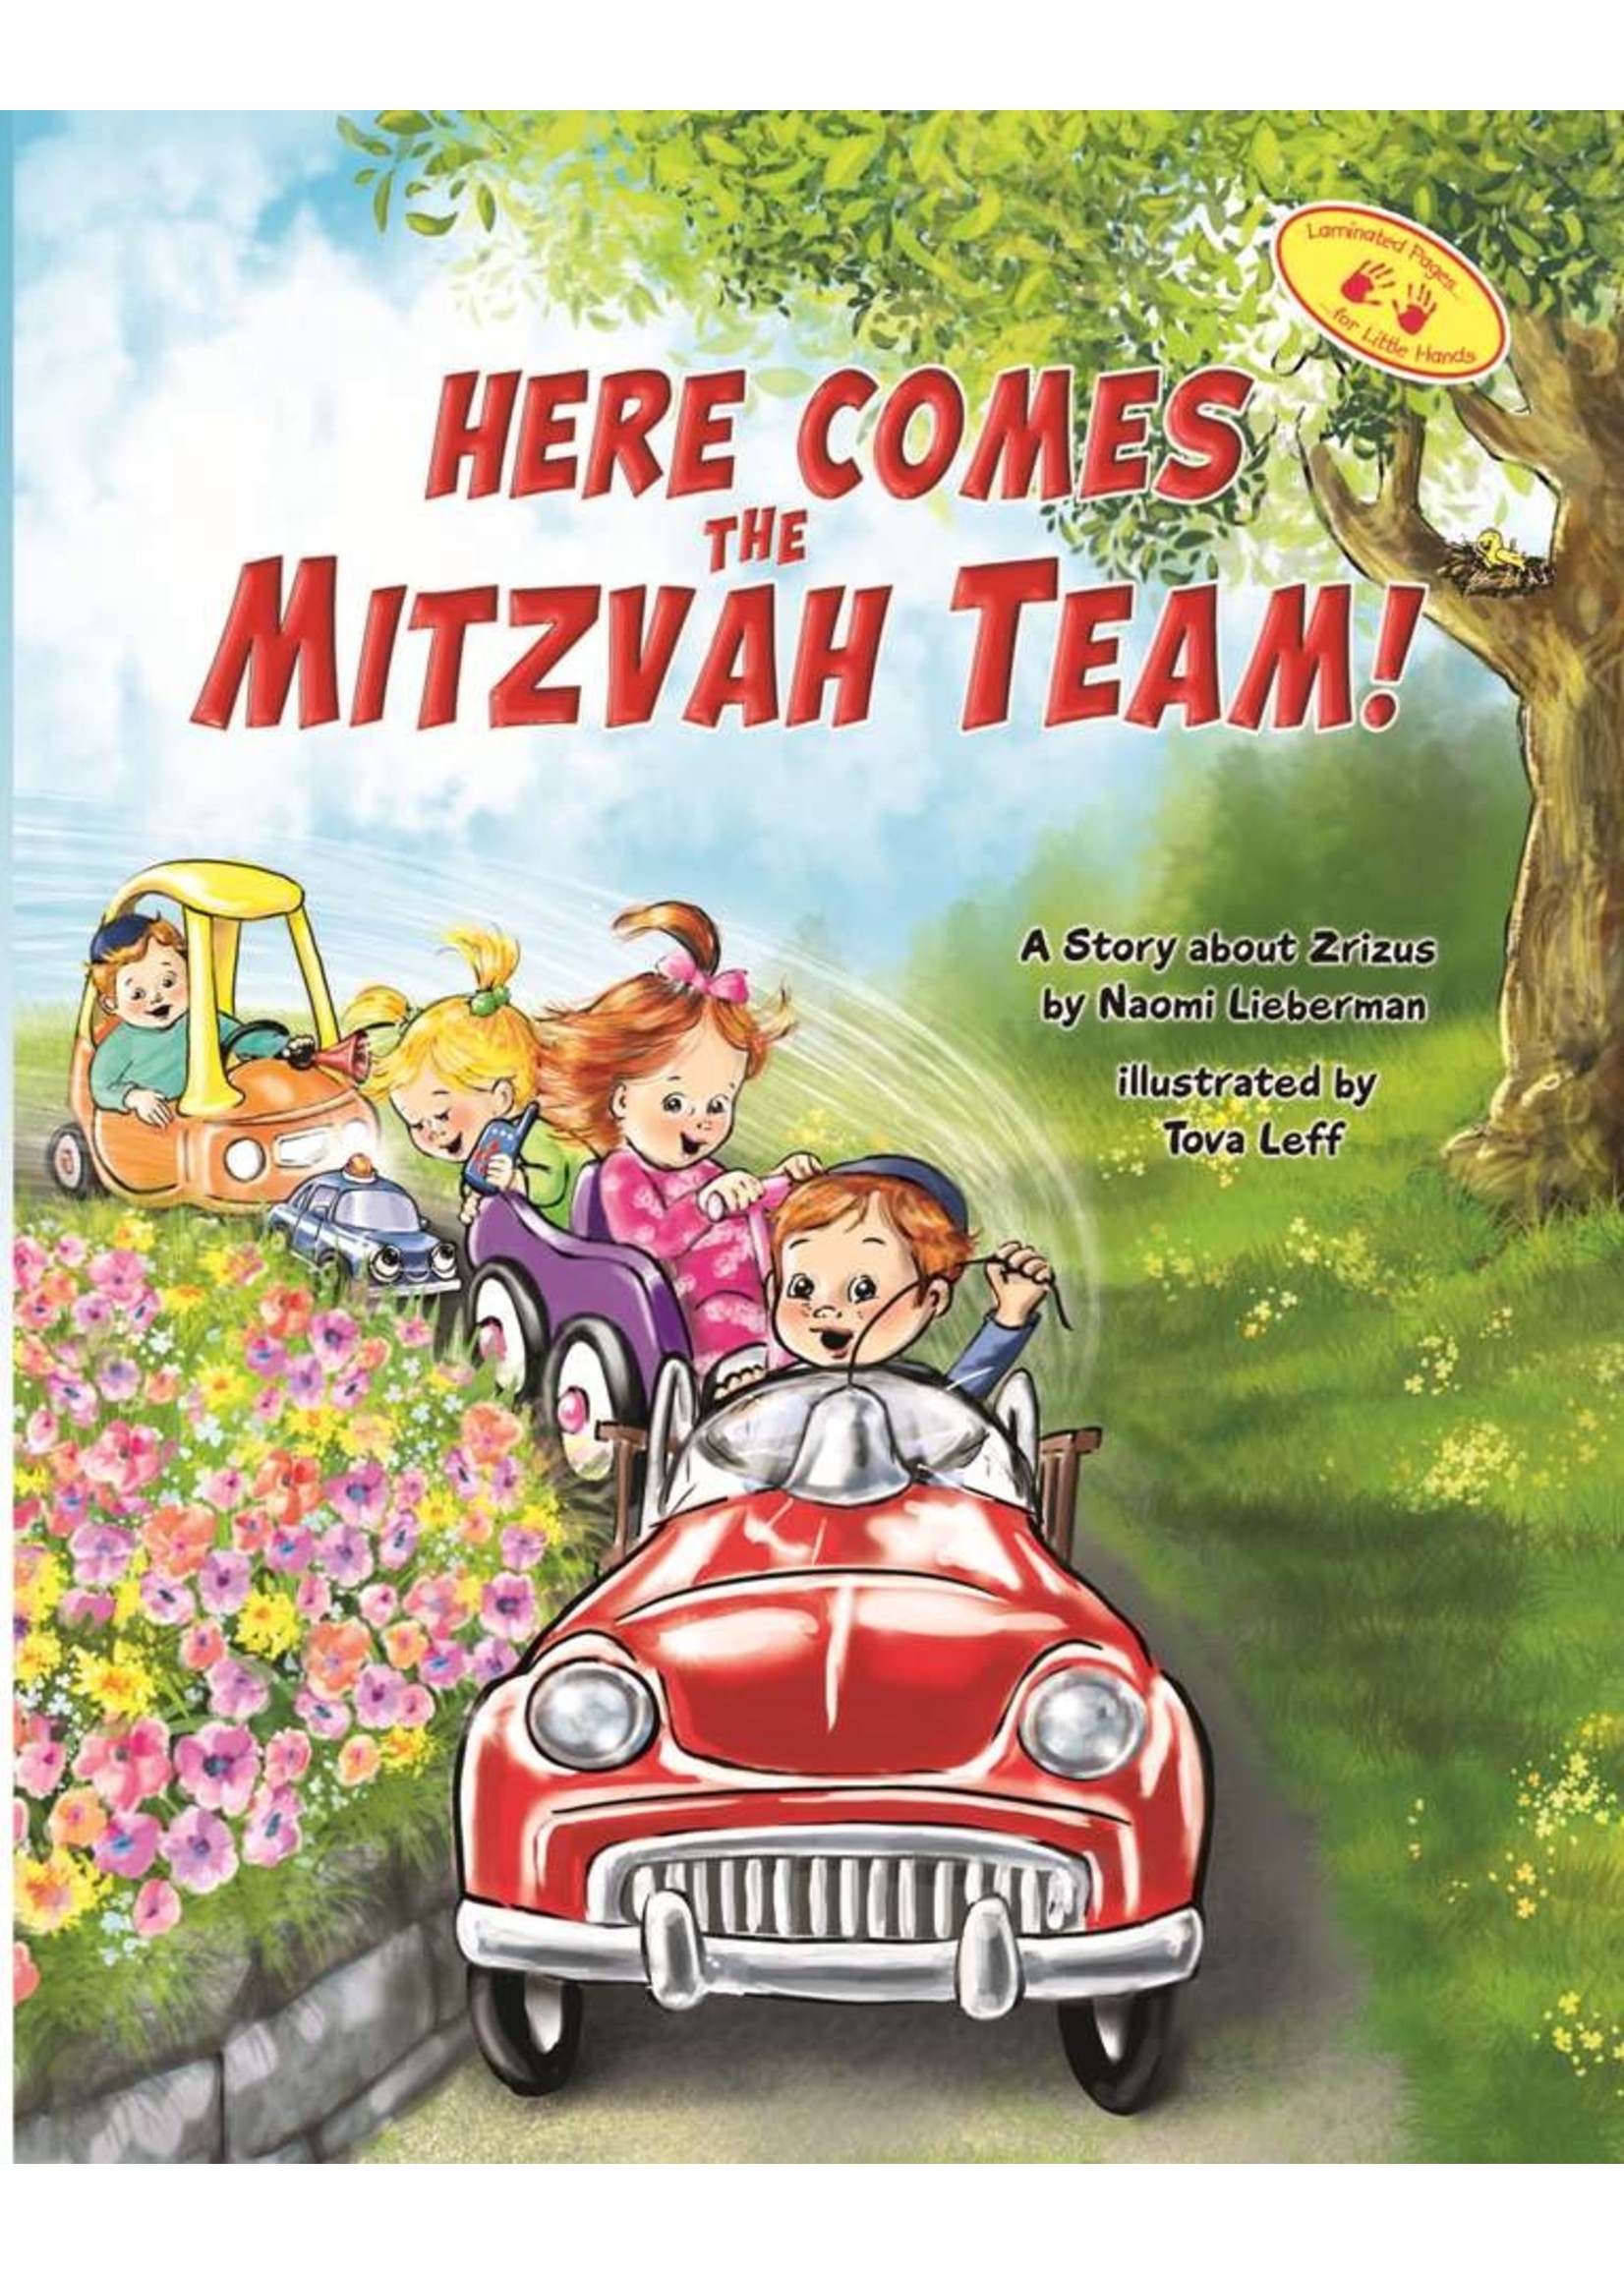 HERE COMES THE MITZVAH TEAM